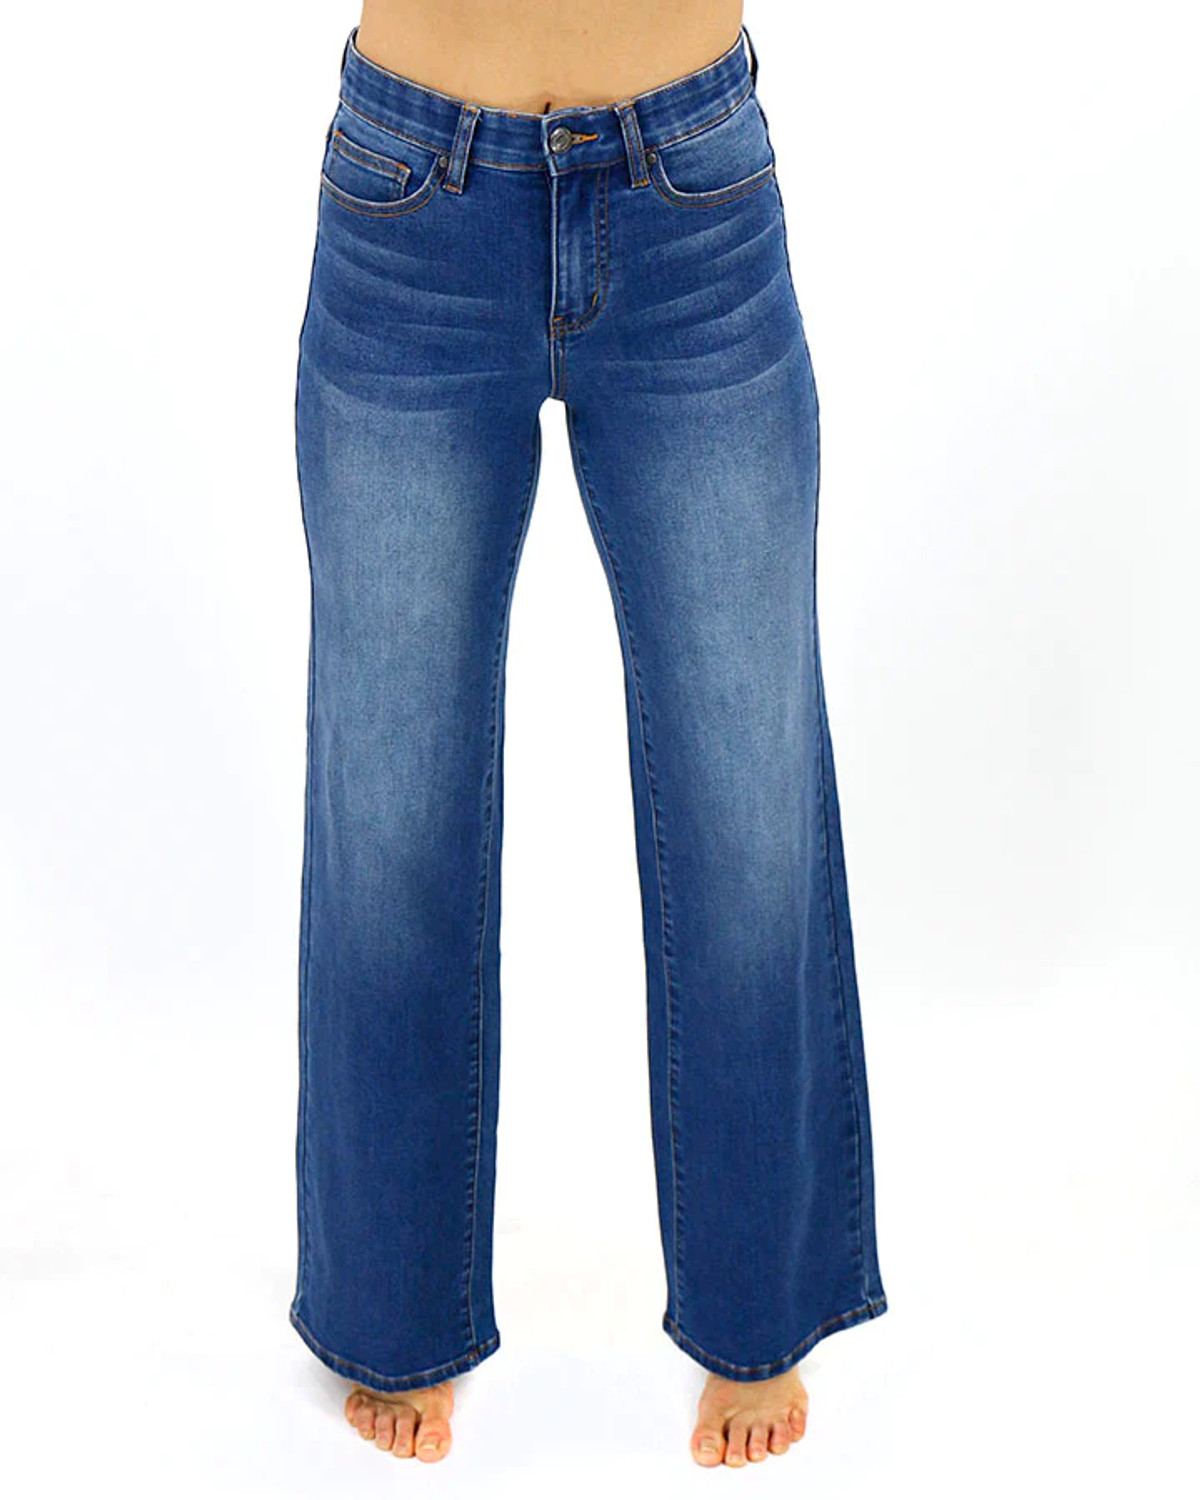 Wide Leg Premium Denim in Distressed Light-Wash - Grace and Lace